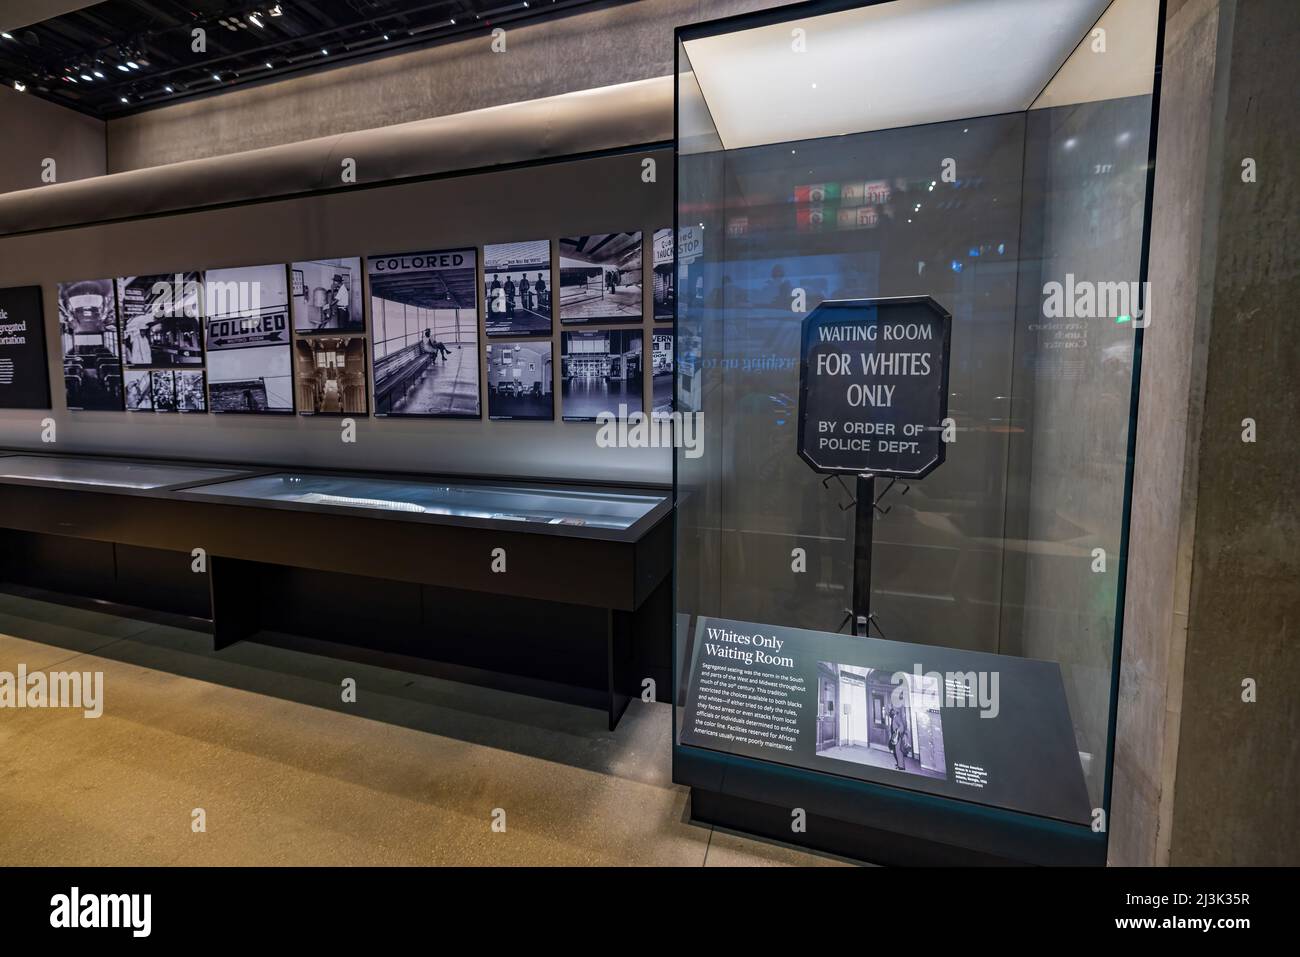 Washington DC, APR 1 2022 - Interior view of the National Museum of African American History and Culture Stock Photo